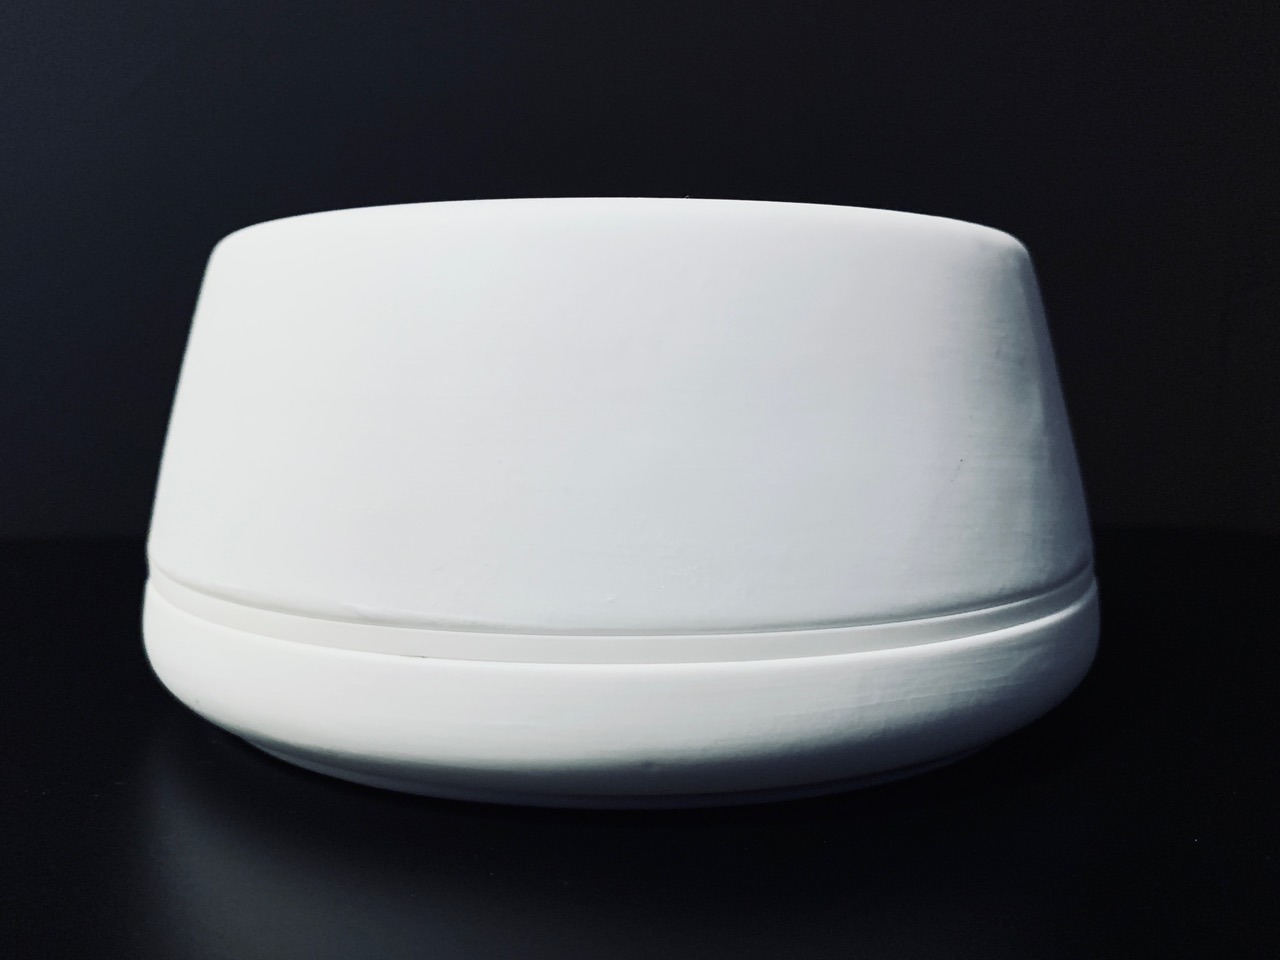 Image of the Skagerak low pot white 15 cm offered in this advertisement.